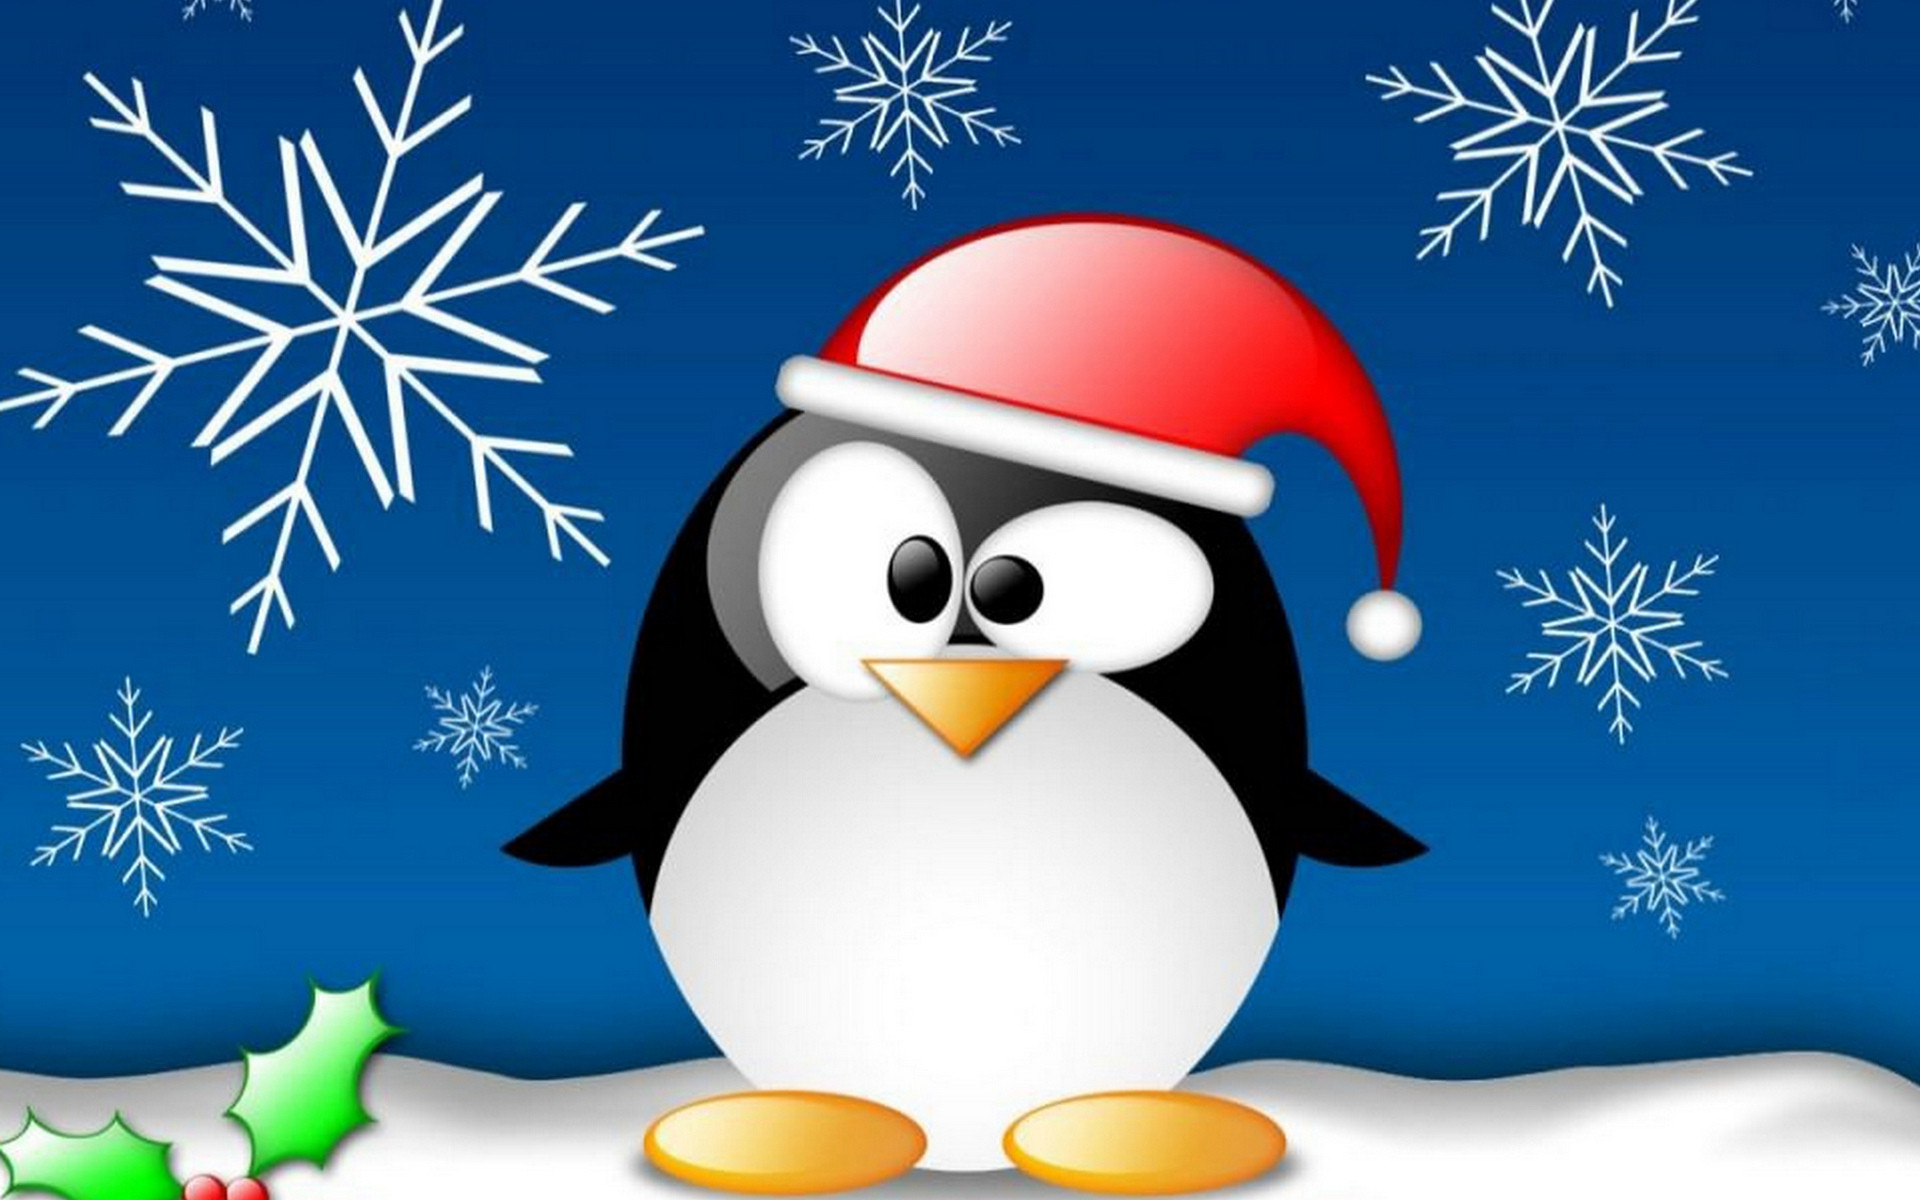 Penguin on Christmas wallpapers and images – wallpapers, pictures